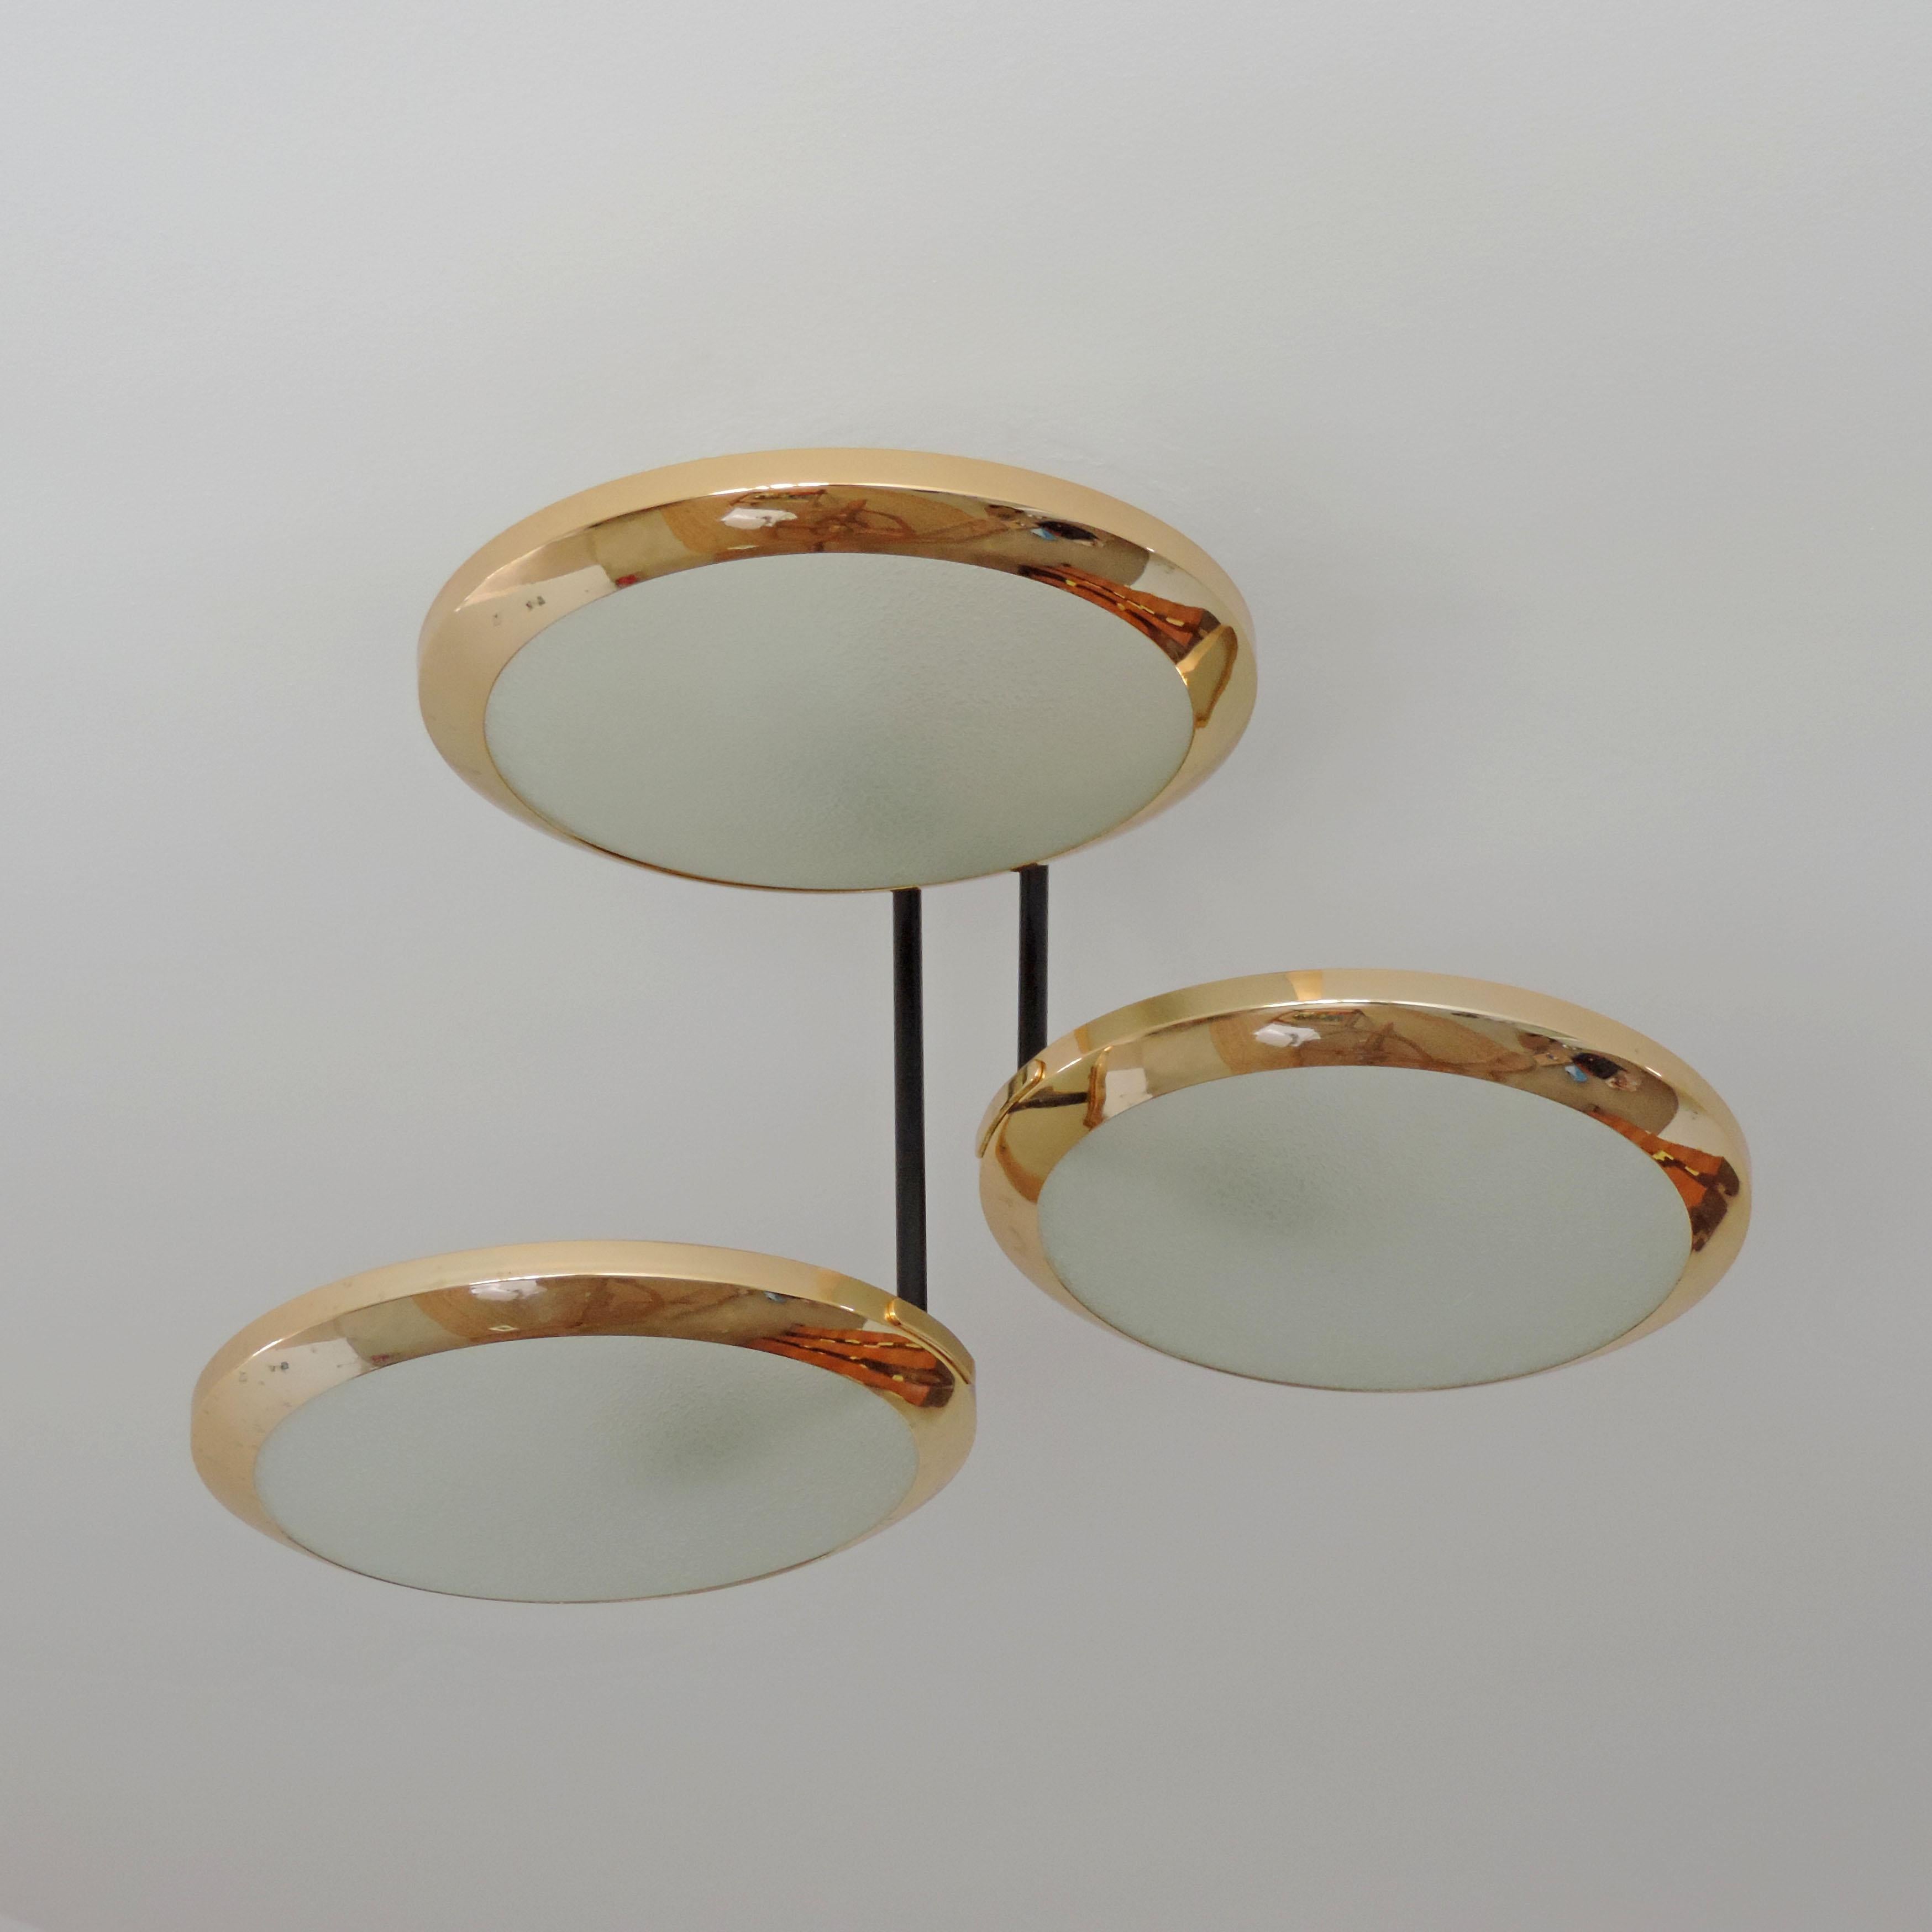 Splendid Stilnovo three discs ceiling lamp in brass and glass, Italy 1950s
Reference :
Botteghe Storiche di Milanesi, Milan, 2006, p. 21 
for the five-armed variation from the Cartoleria Adua, Milan.